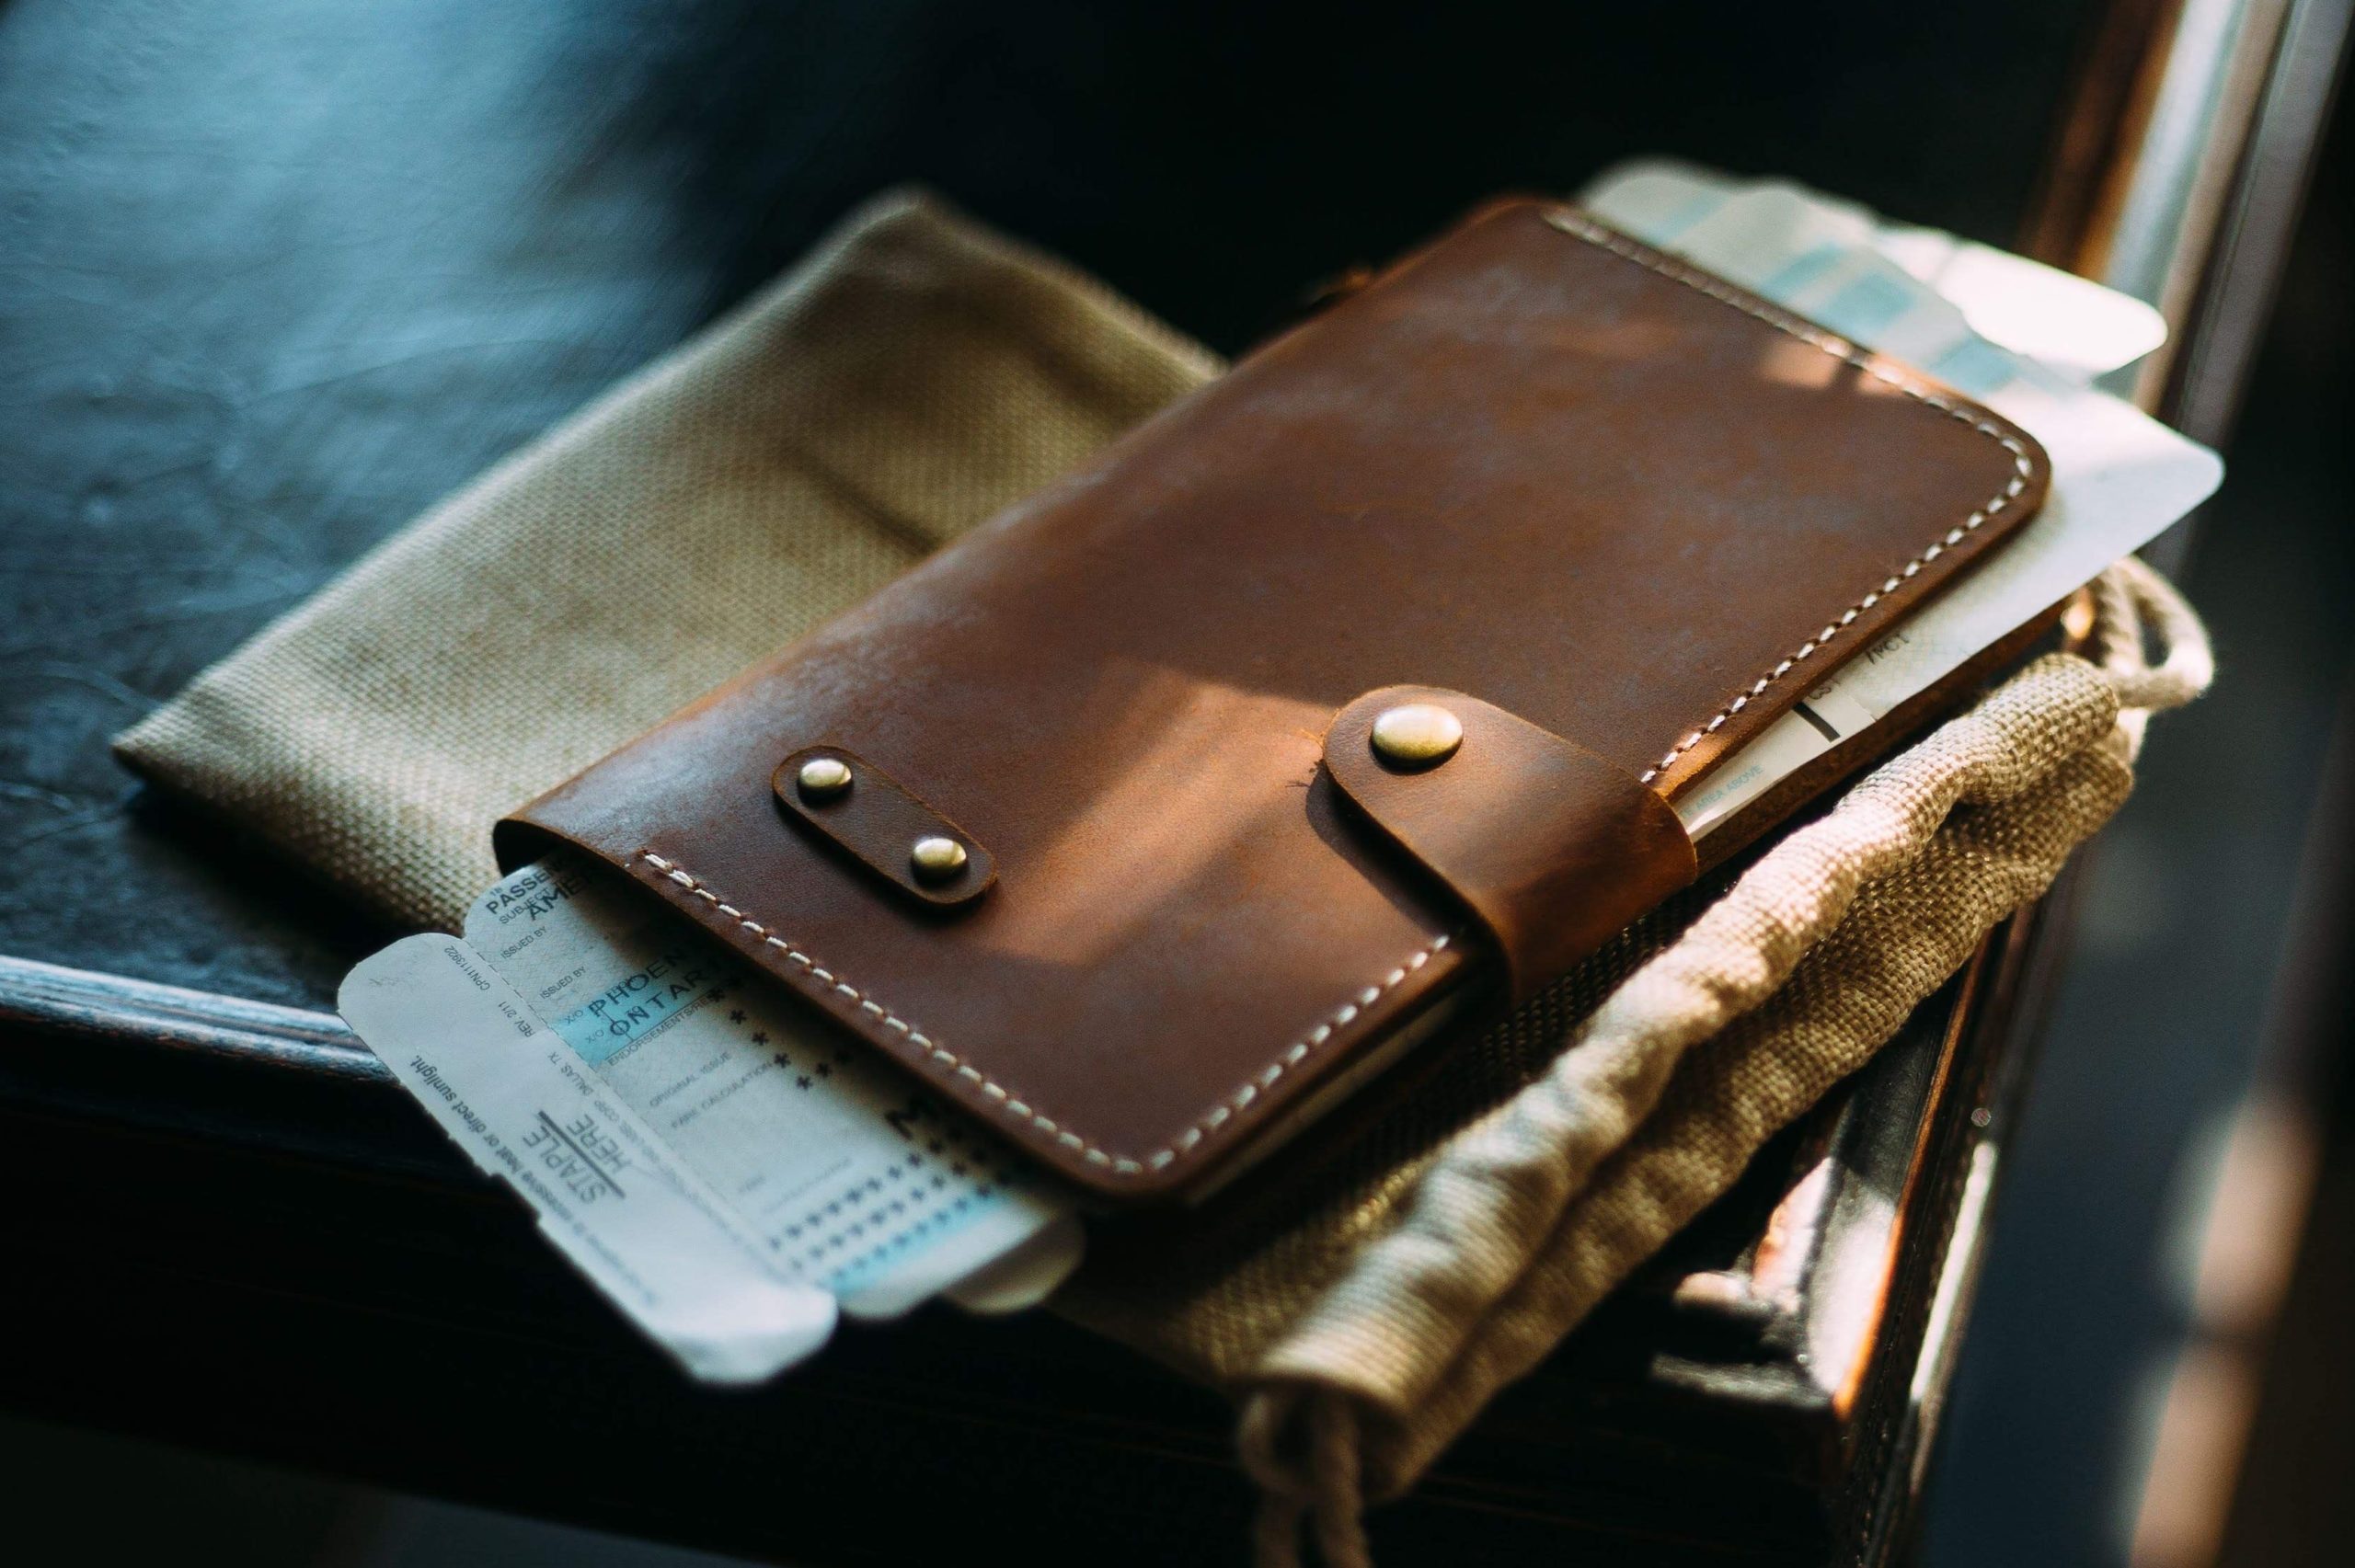 Wallet for plane ticket